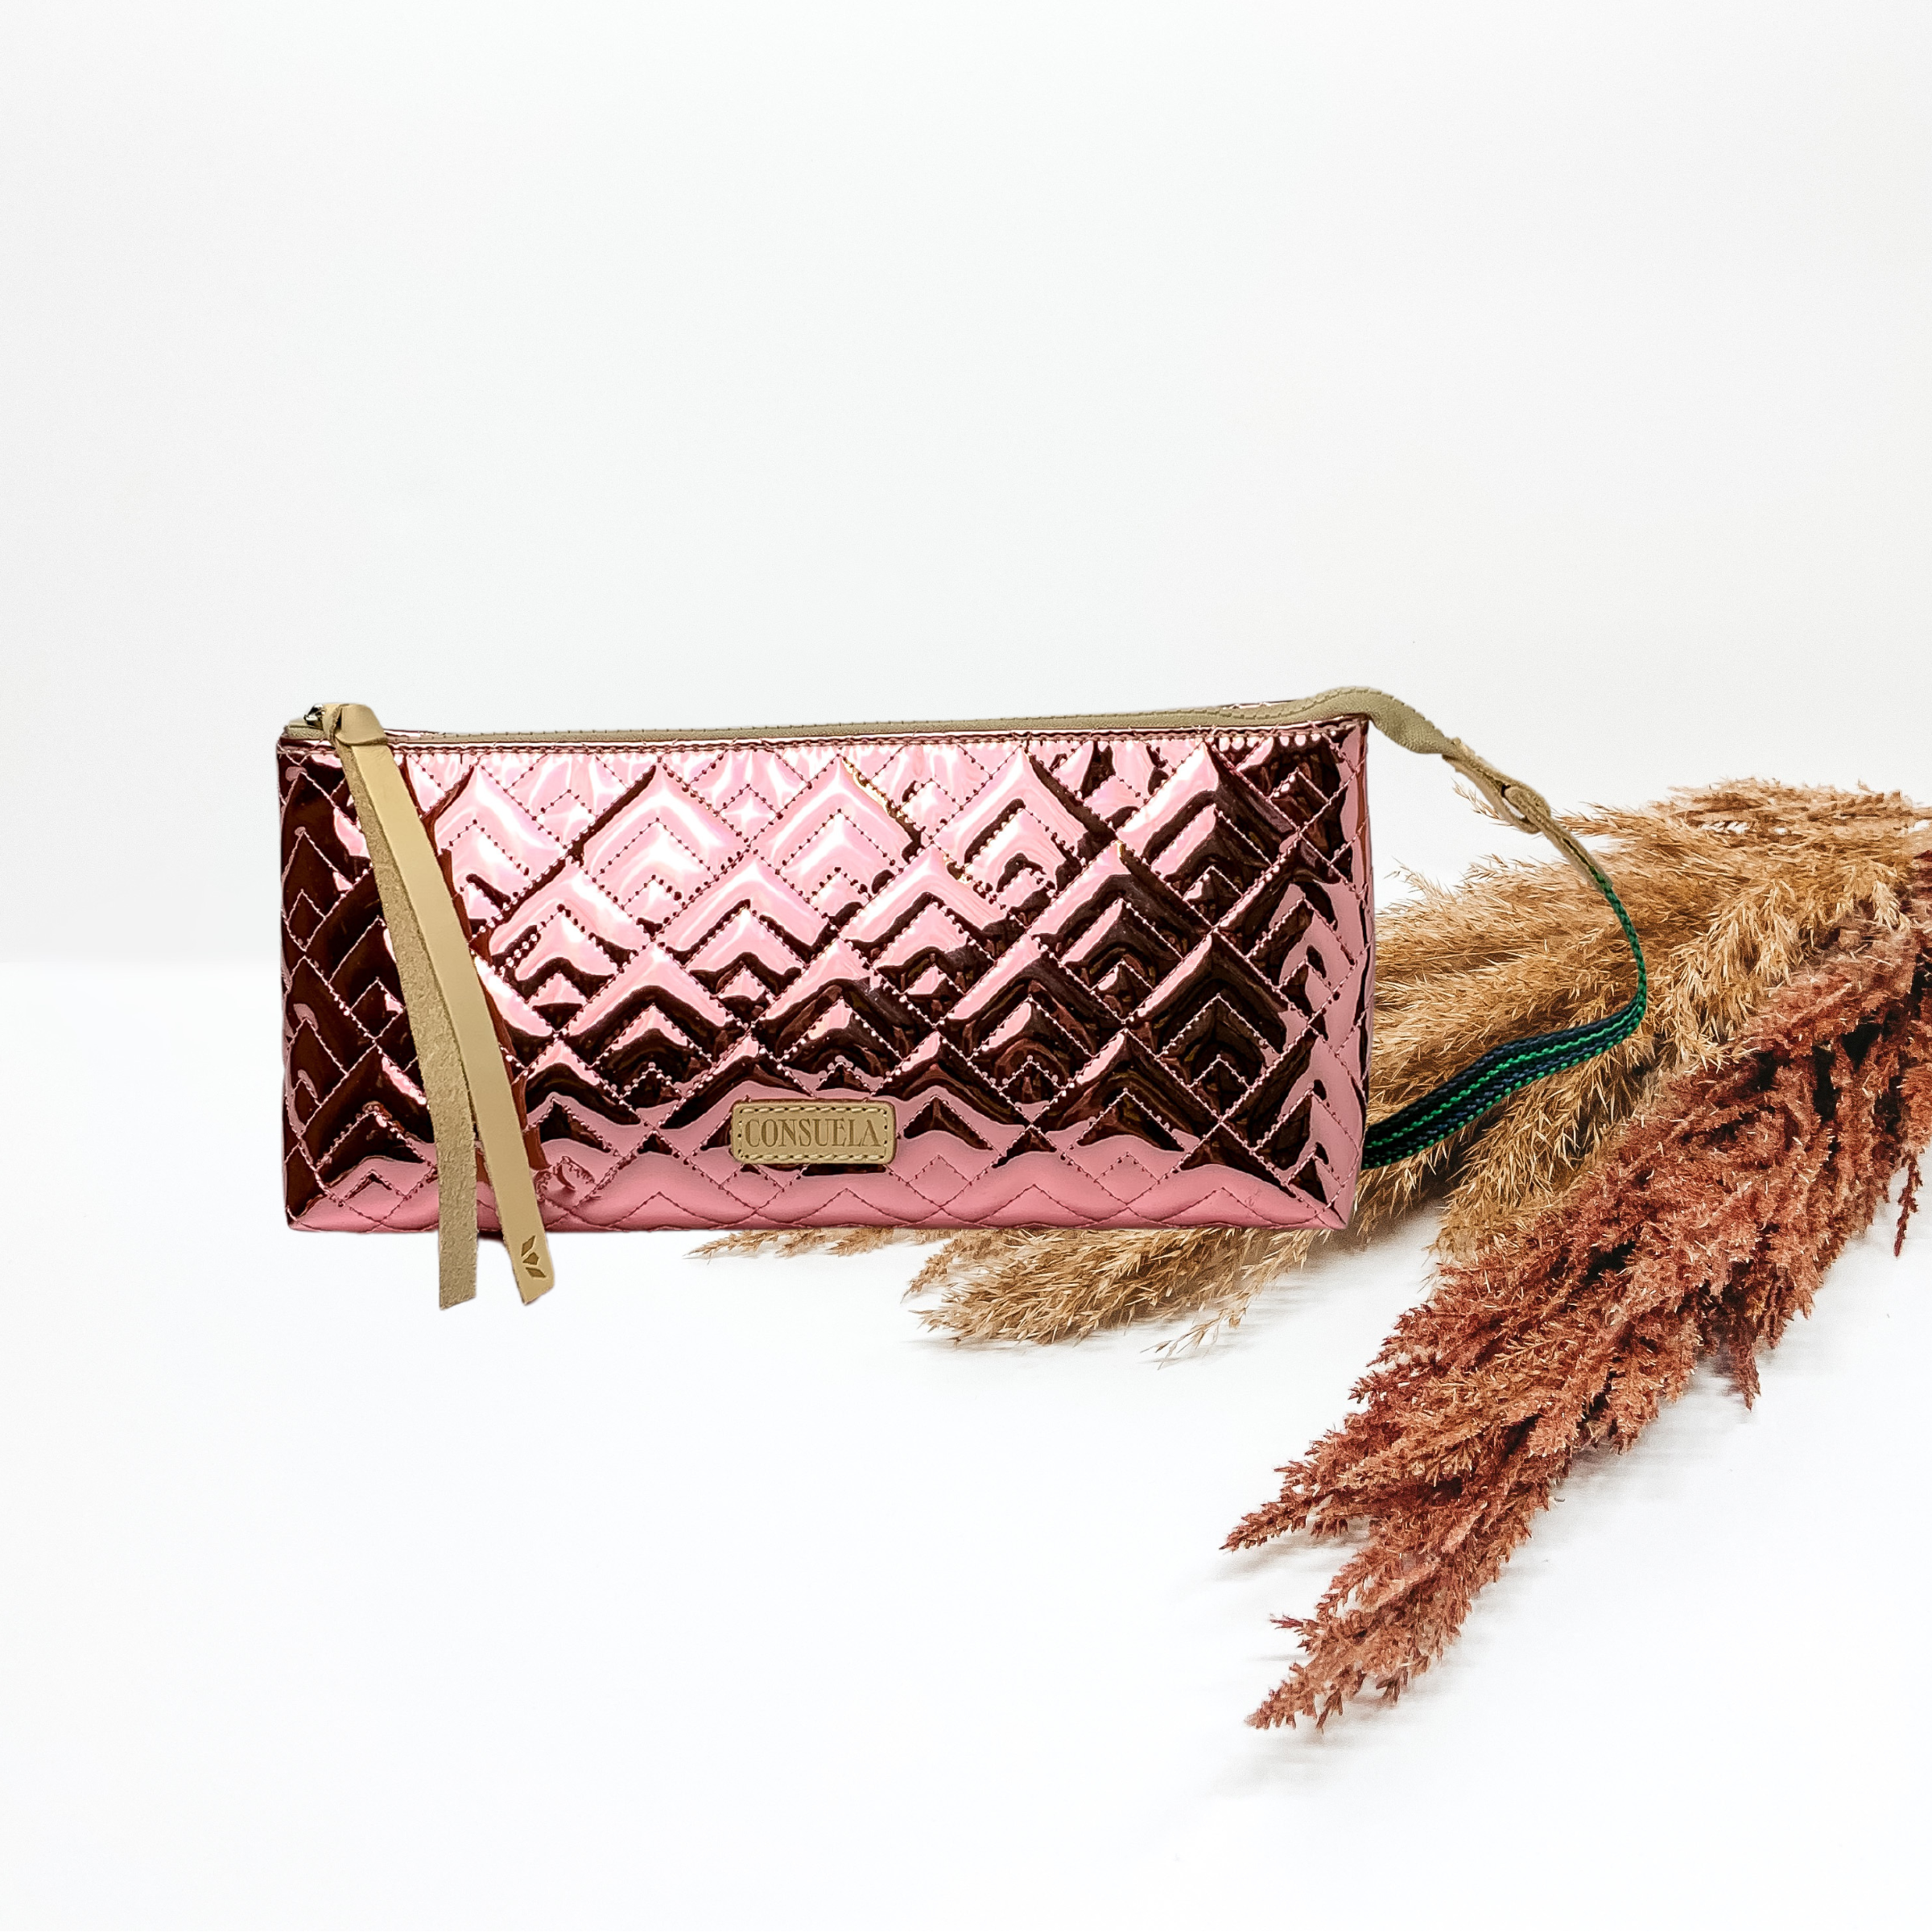 In the middle of the picture is a tool bag in a quilted metallic pink pattern. Bag is on a solid white background with pompas grass to the right of the bag. 